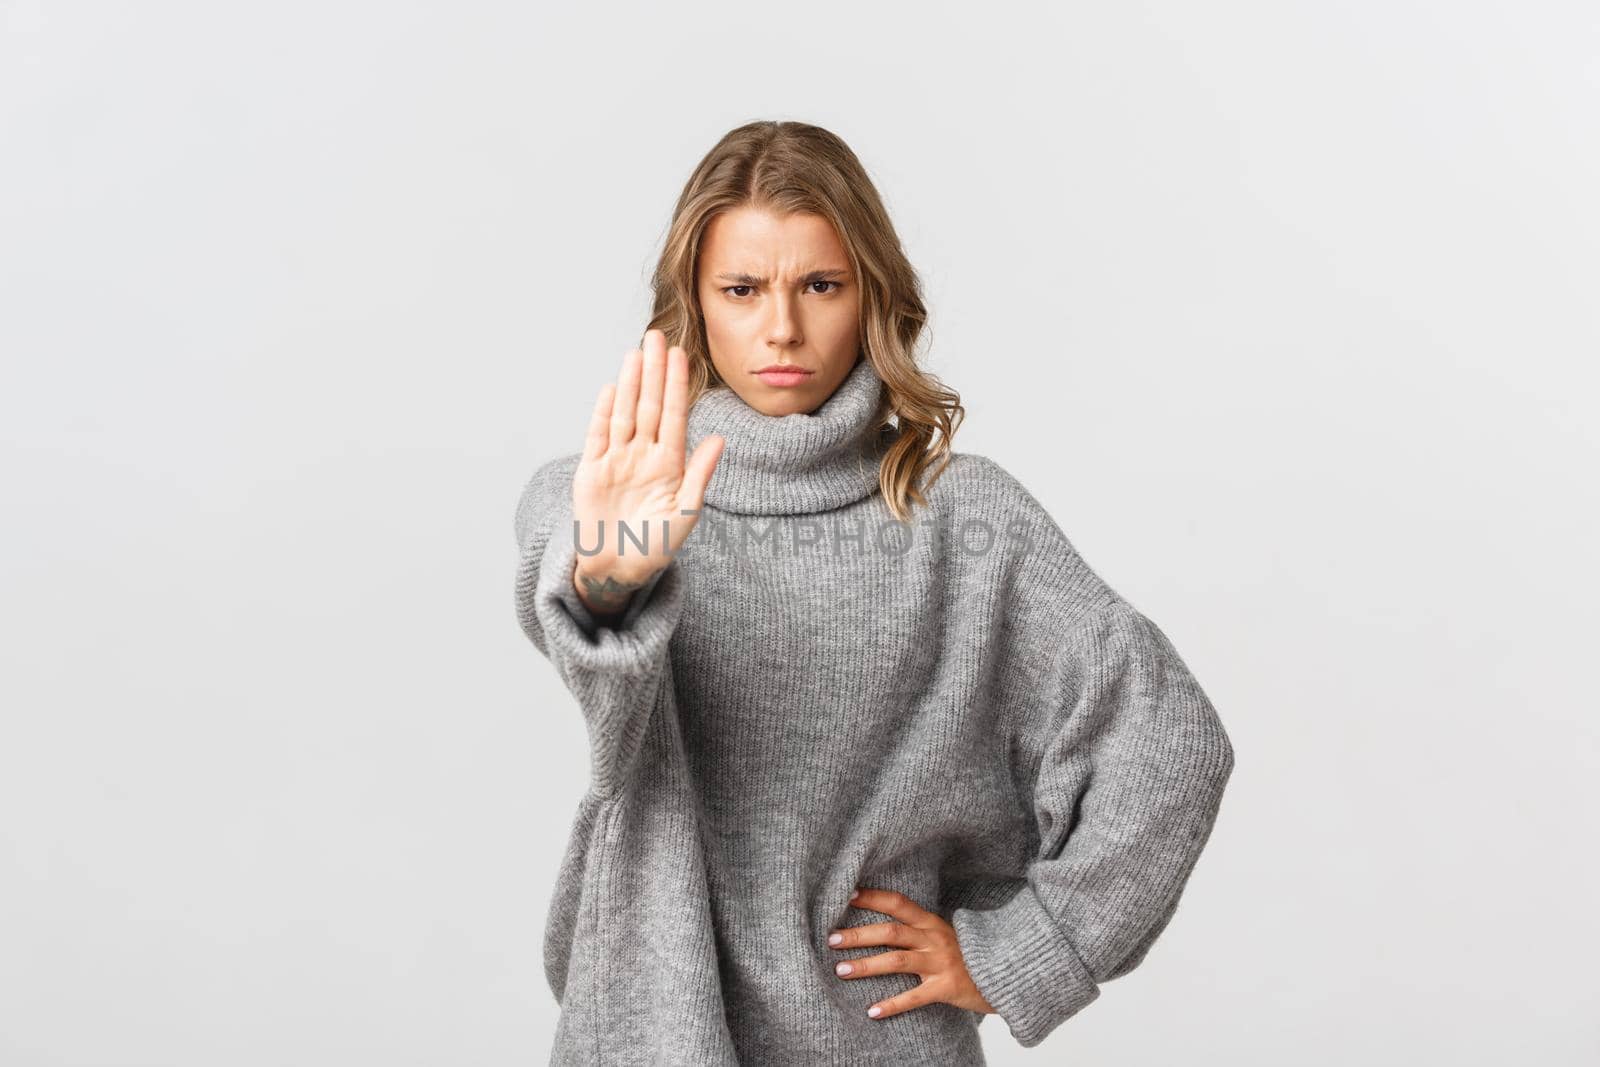 Serious confident woman in grey sweater, extend one arm and telling to stop, prohibit action, frowning disappointed, standing over white background.